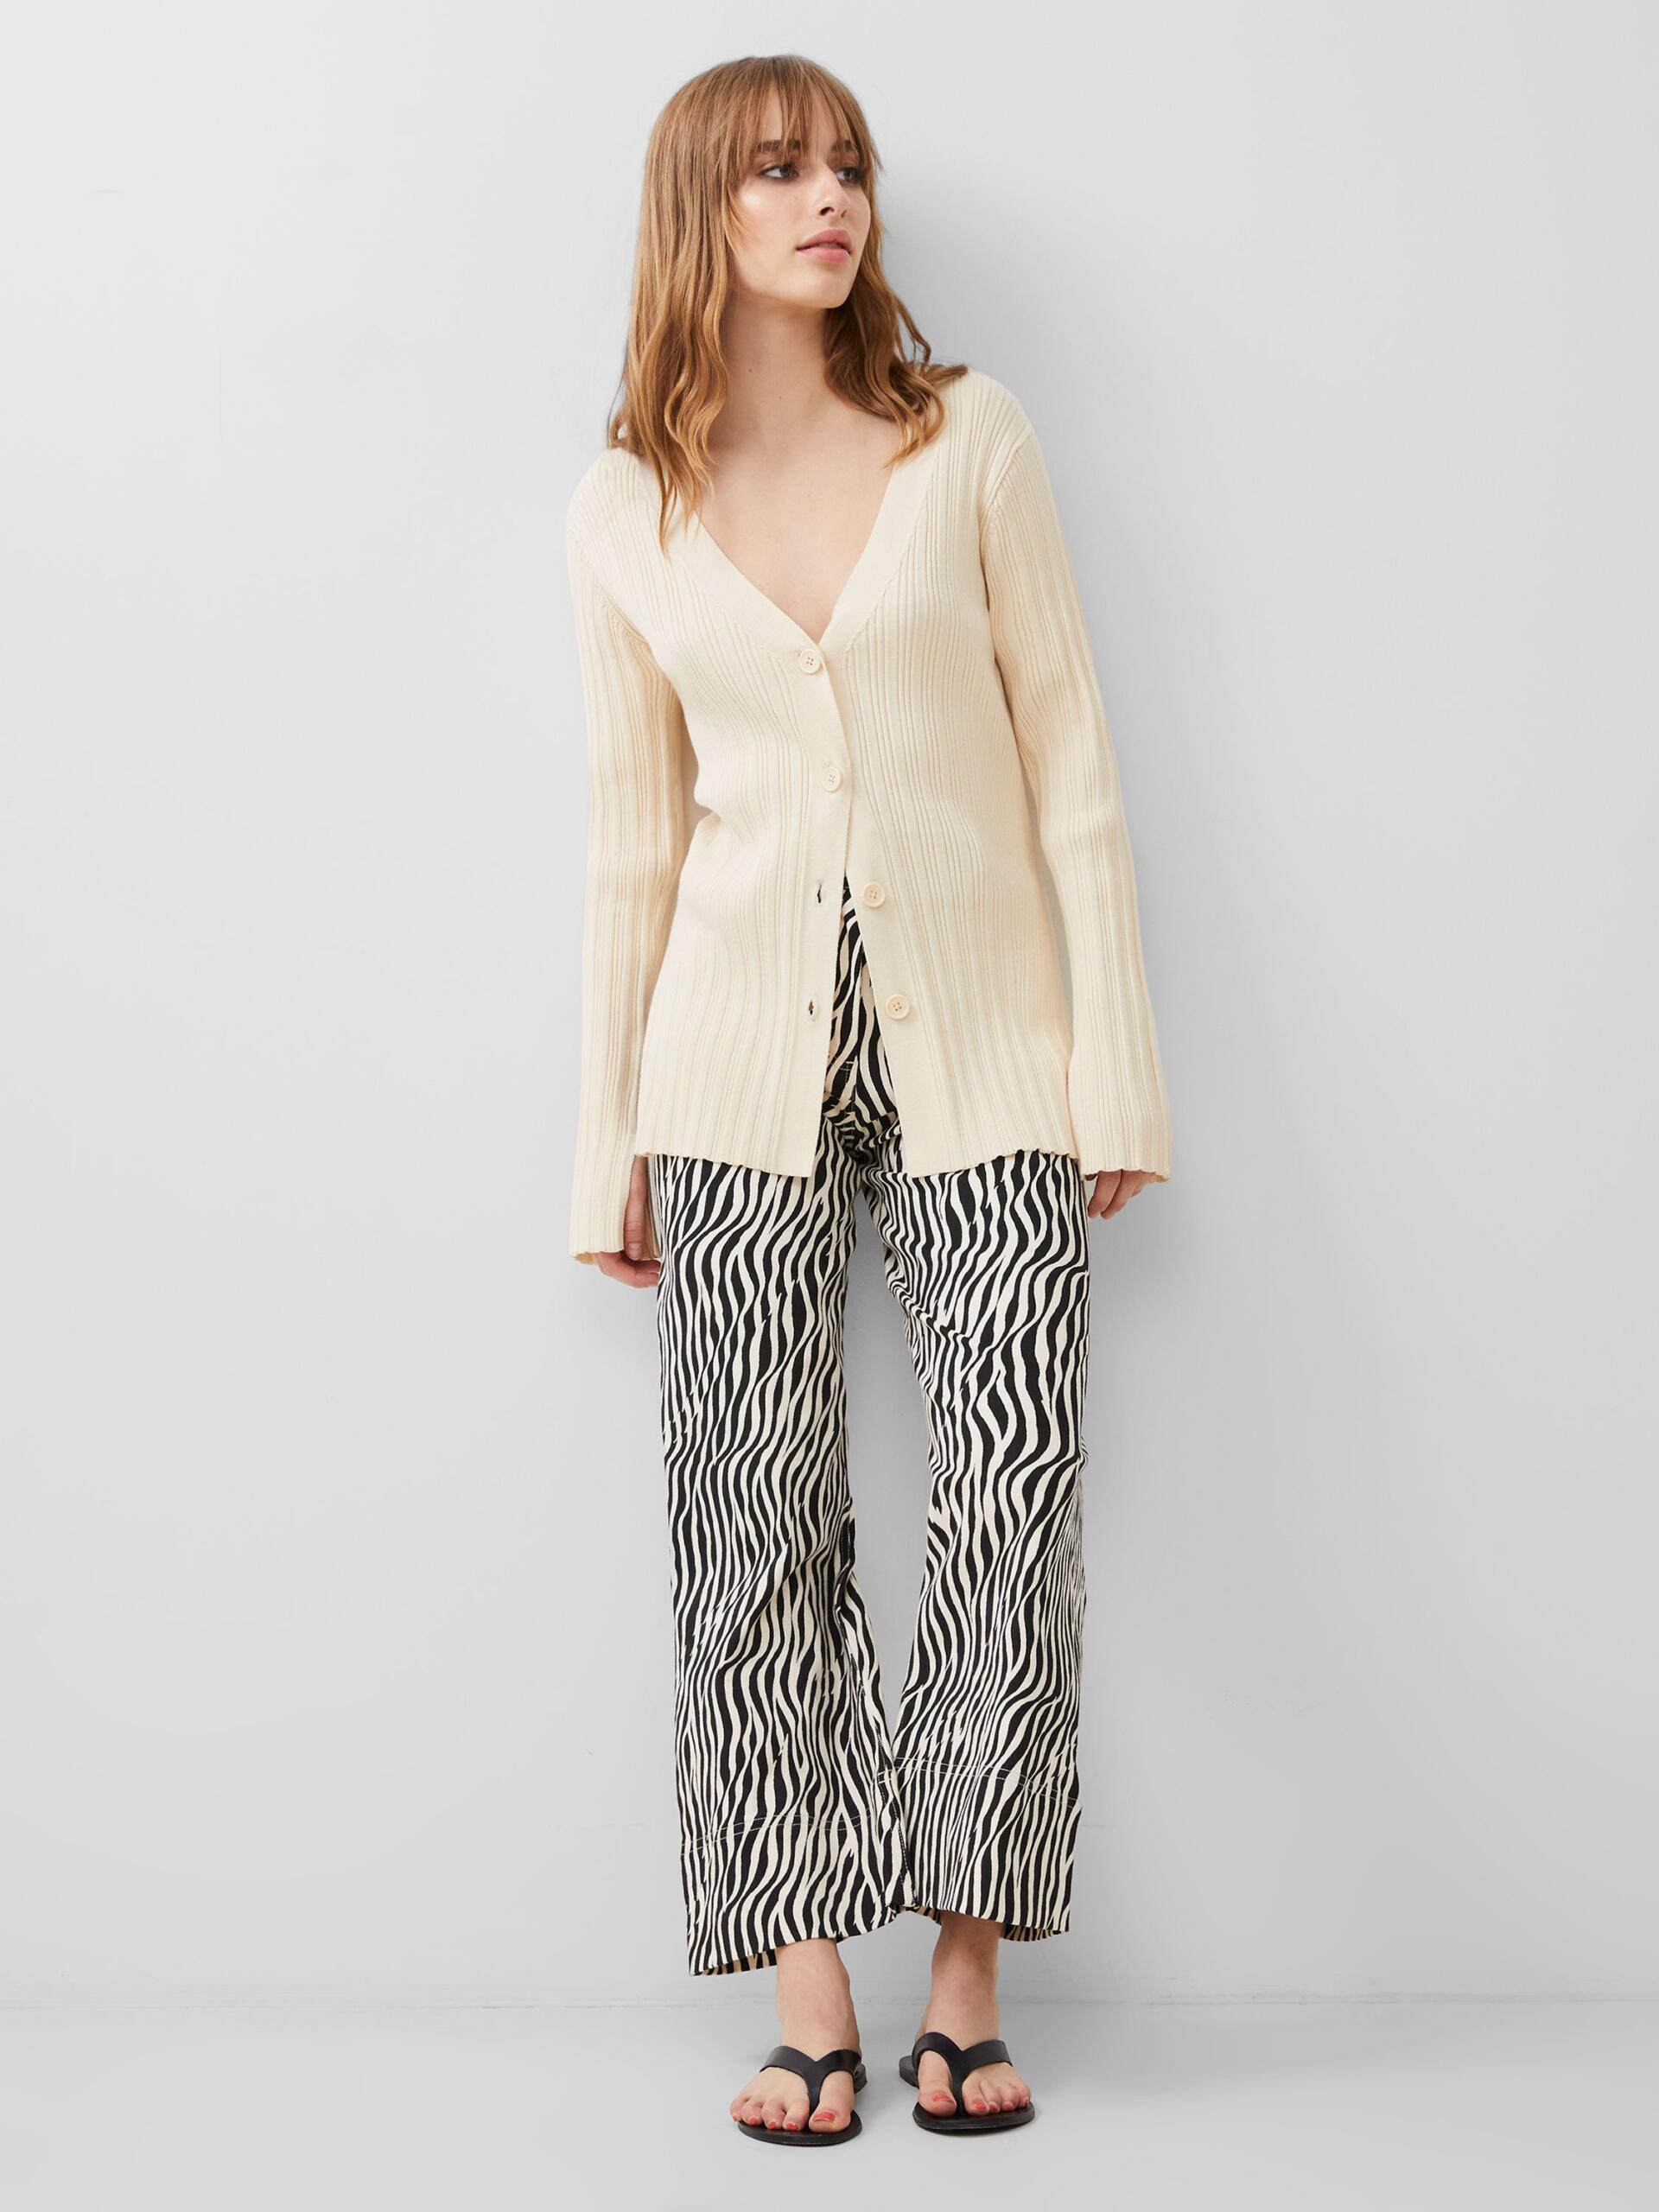 French Connection Leonora Recycled Cardigan Classic Cream | Rather Saucy